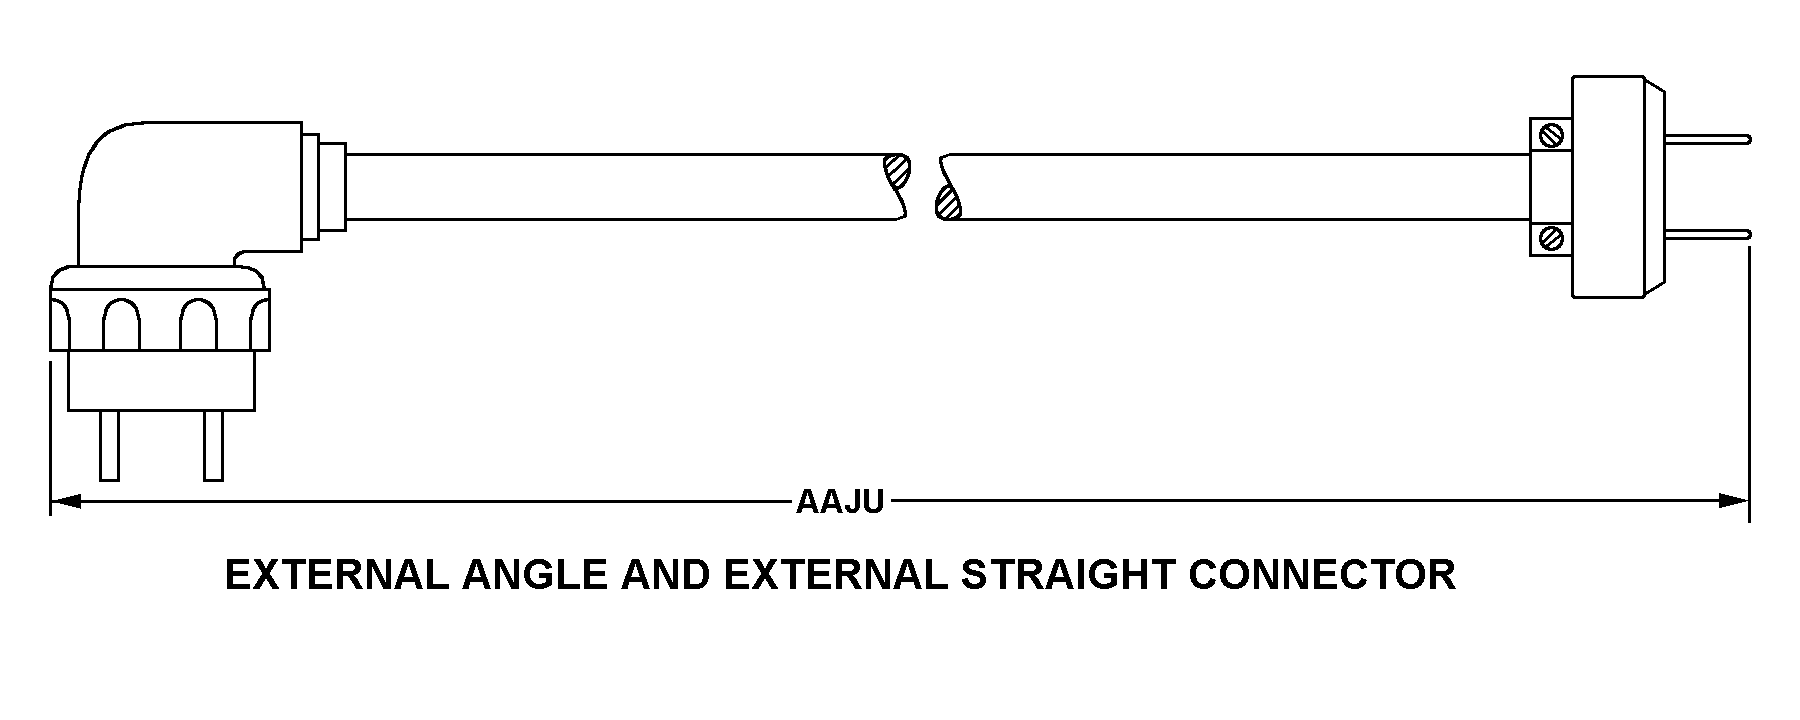 EXTERNAL ANGLE AND EXTERNAL STRAIGHT CONNECTOR style nsn 5995-01-573-7780